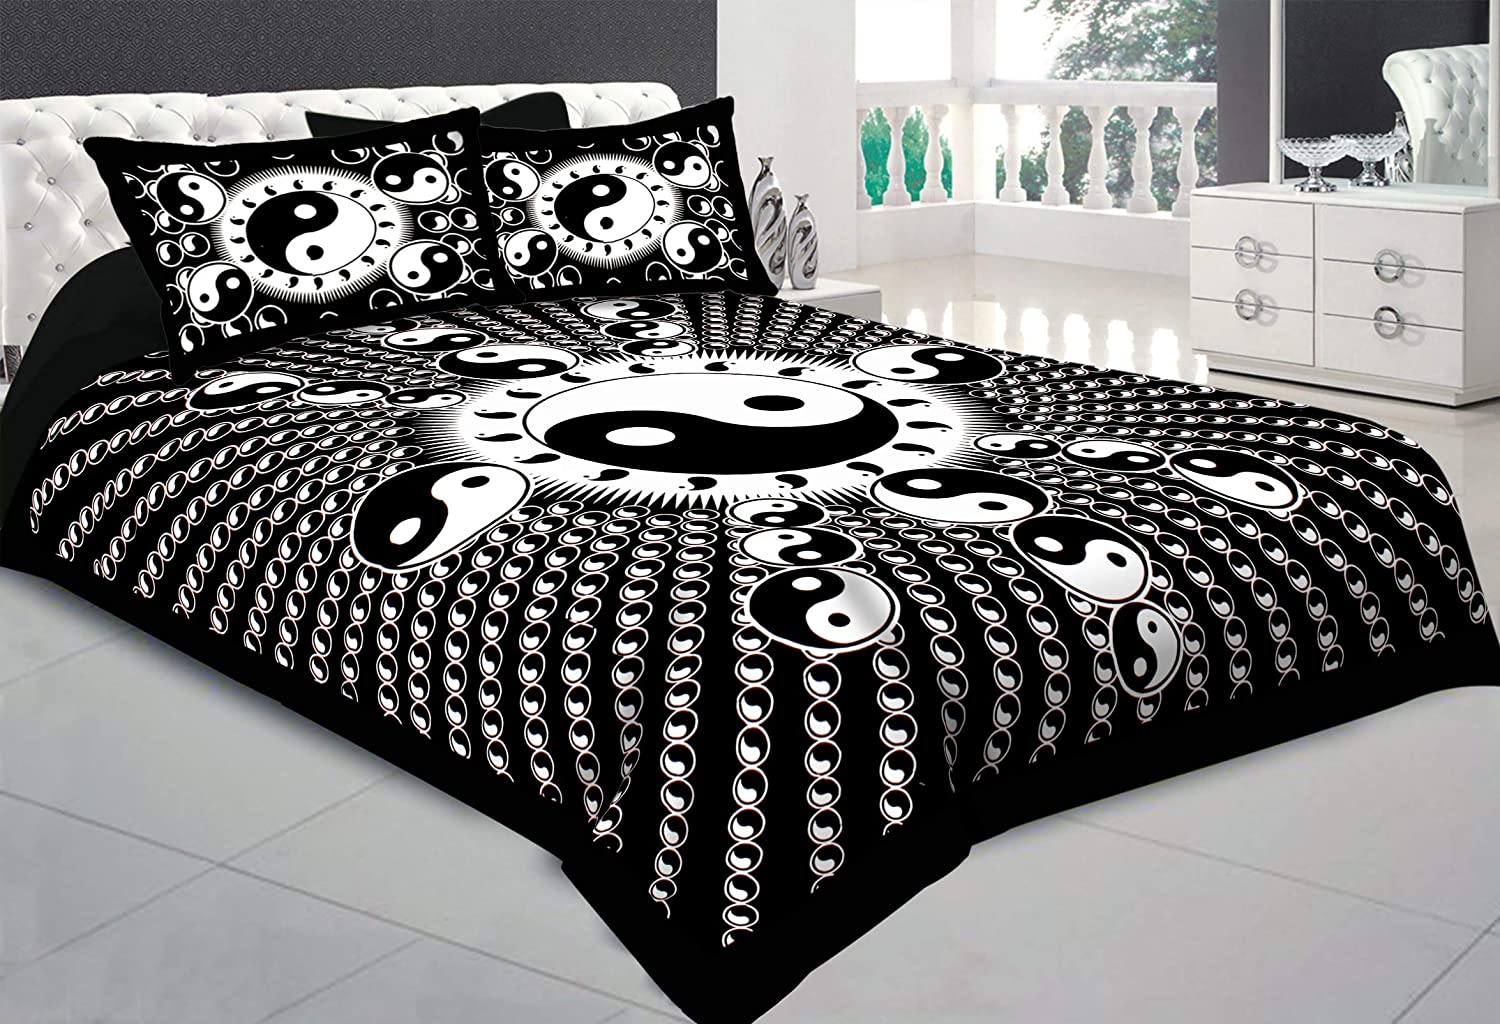 Black  Border Black  Base Doordarshan  Print Fine Cotton Double Bedsheet  With Pillow Cover